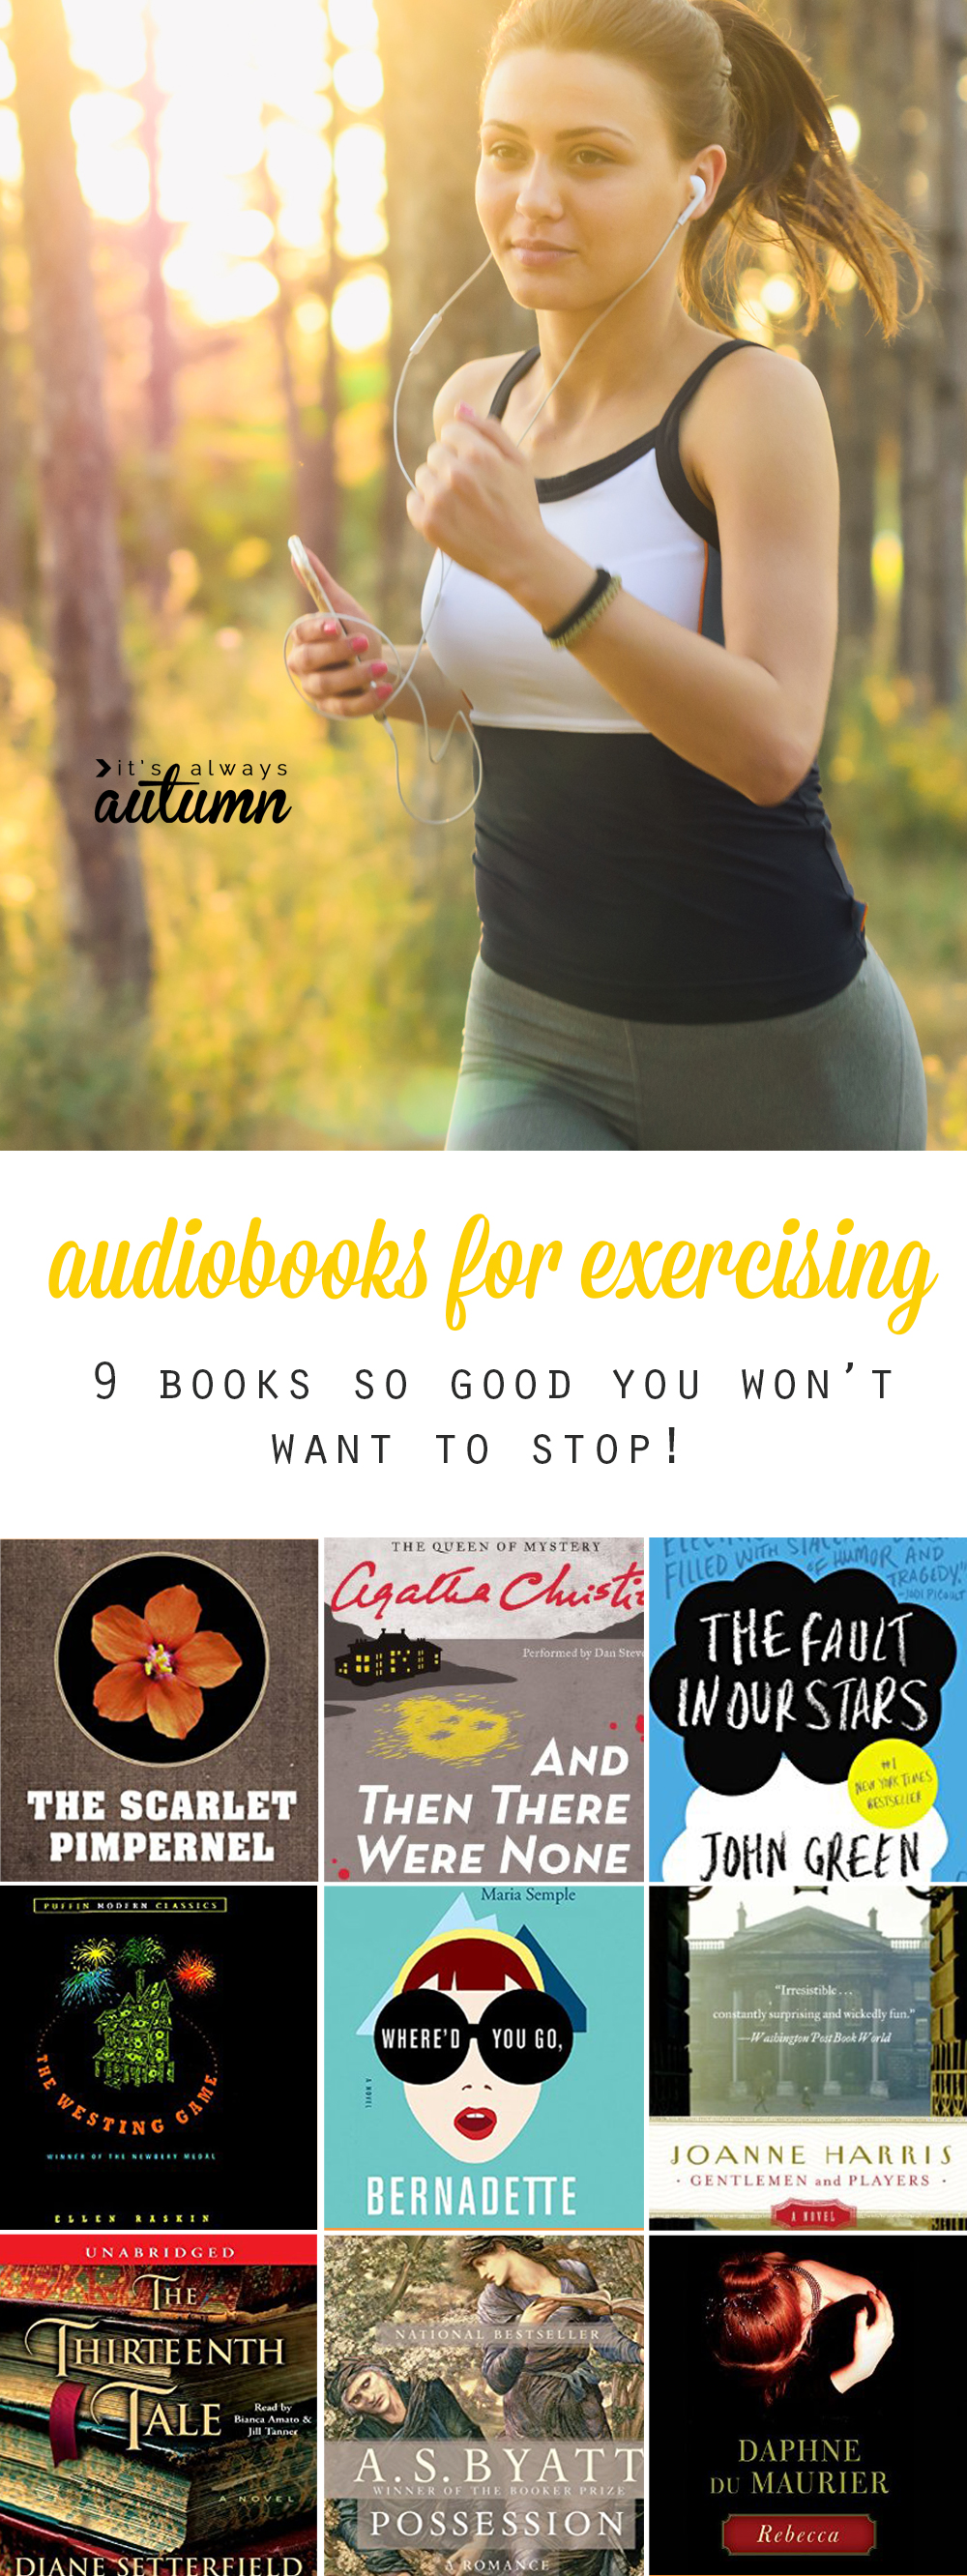 Woman jogging with earbuds in and collage of book covers